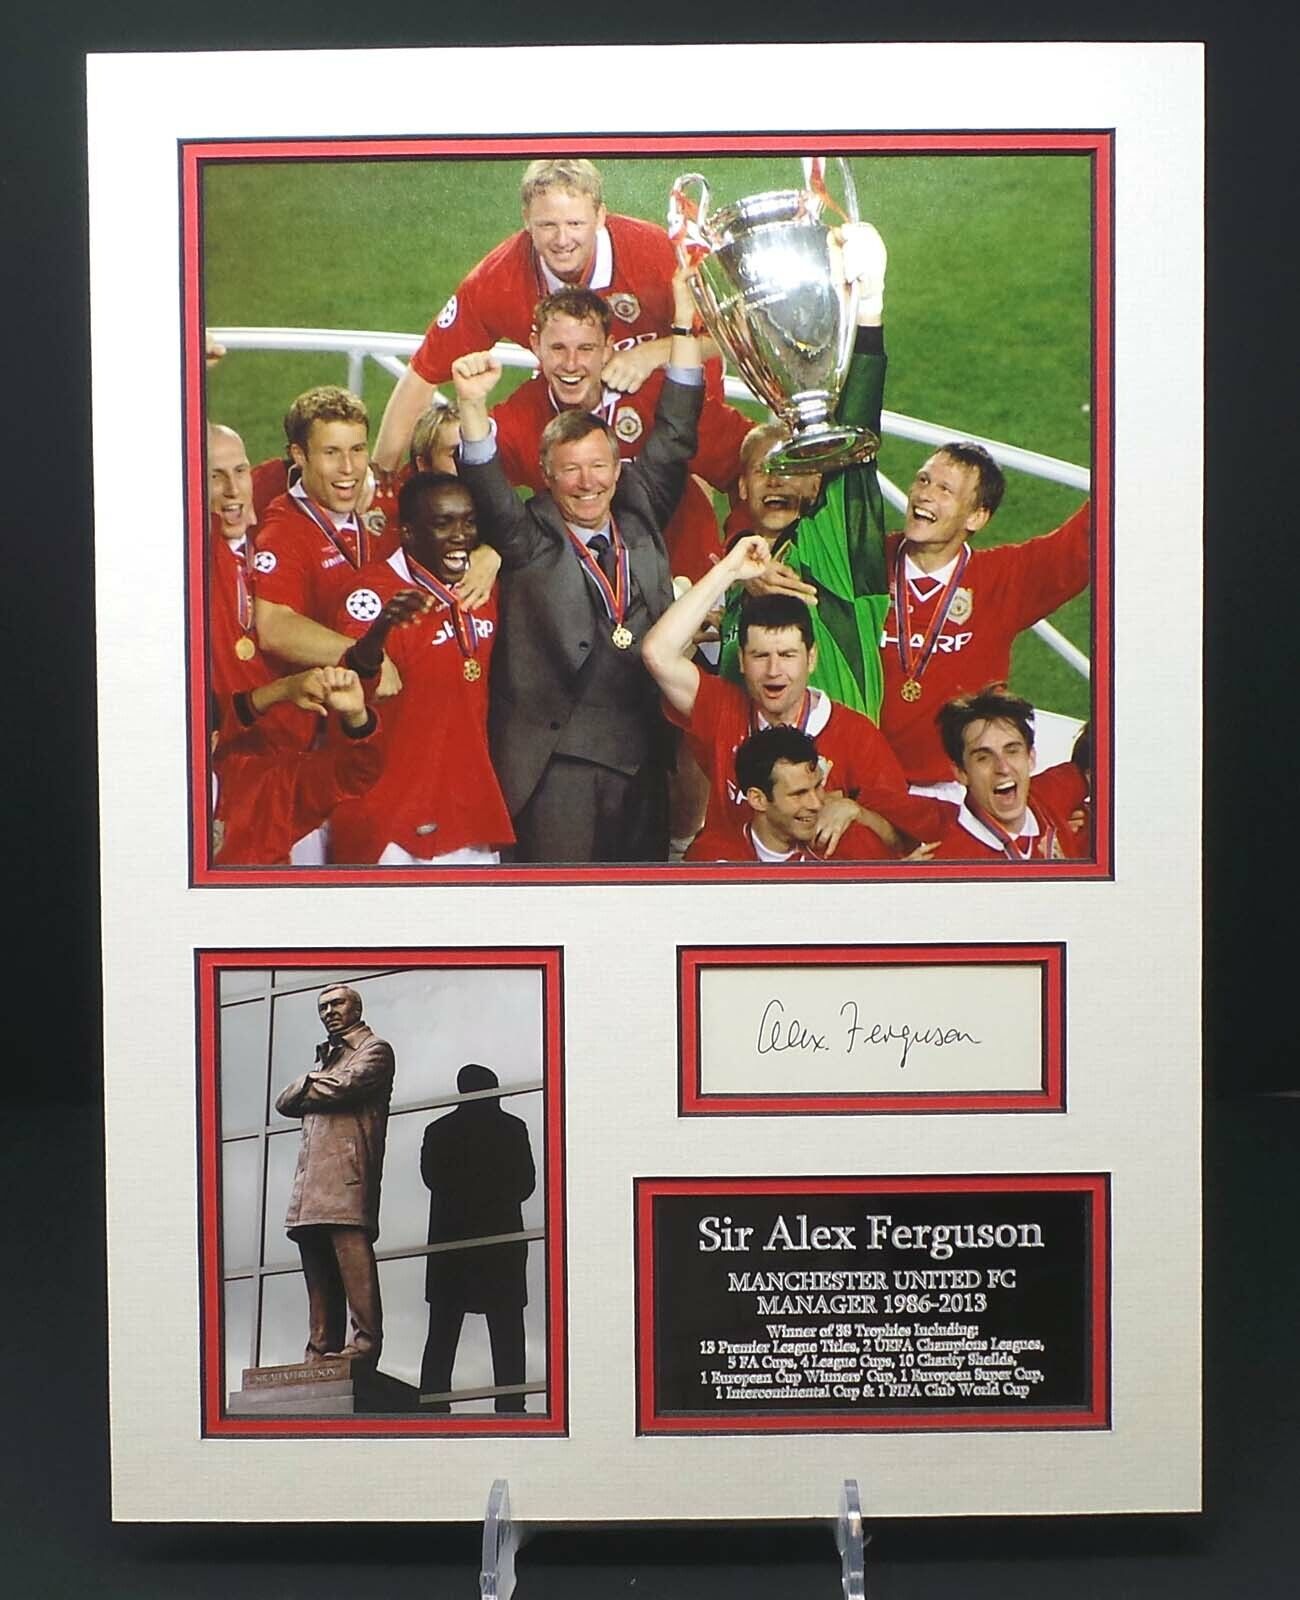 Alex FERGUSON Signed & Mounted Photo Poster painting Display AFTAL RD COA Manchester Utd Manager